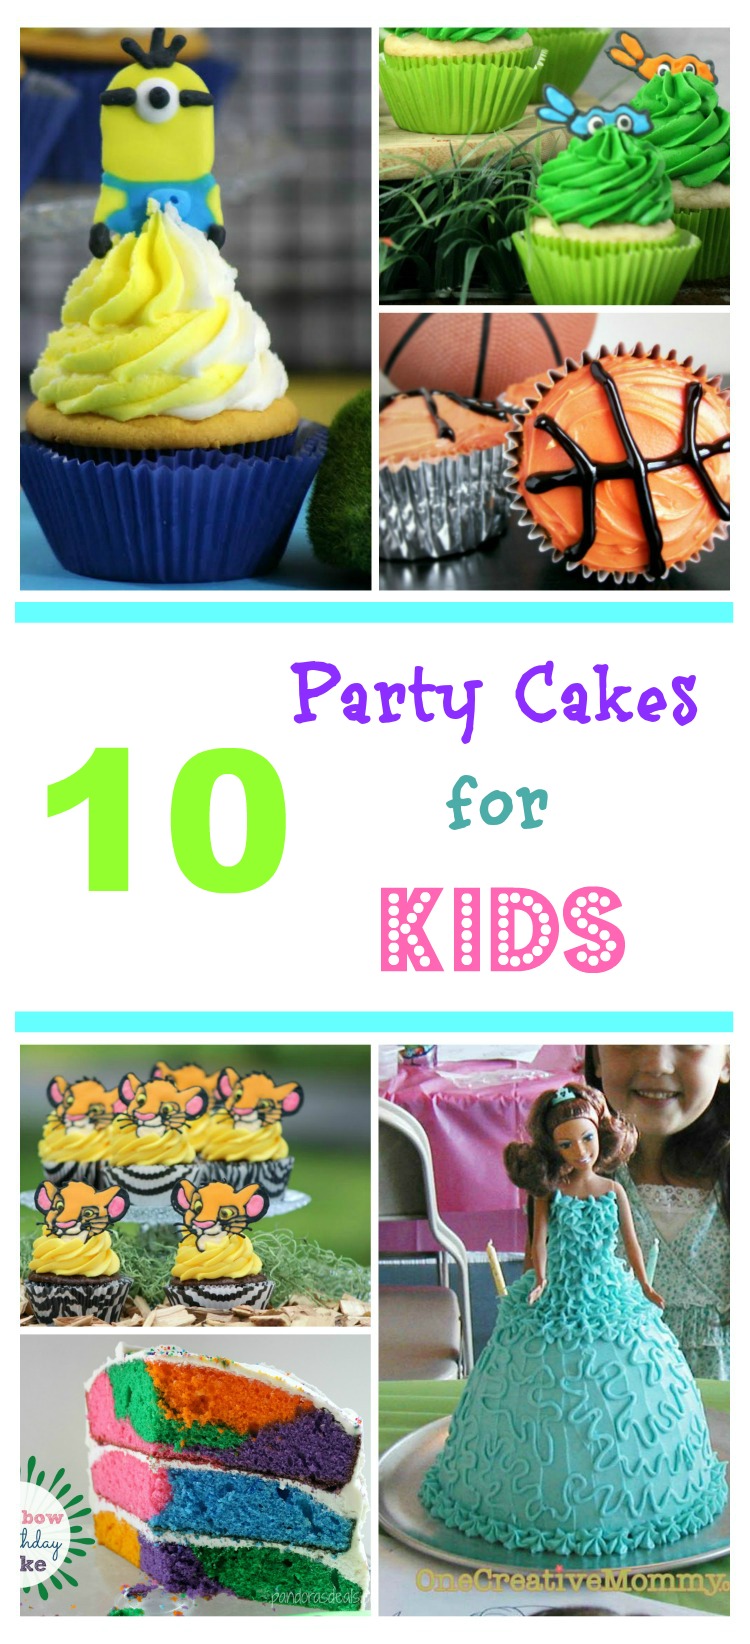 Looking for some cute birthday cake recipes? Check out our list of 10 Party Cakes for Kids here!